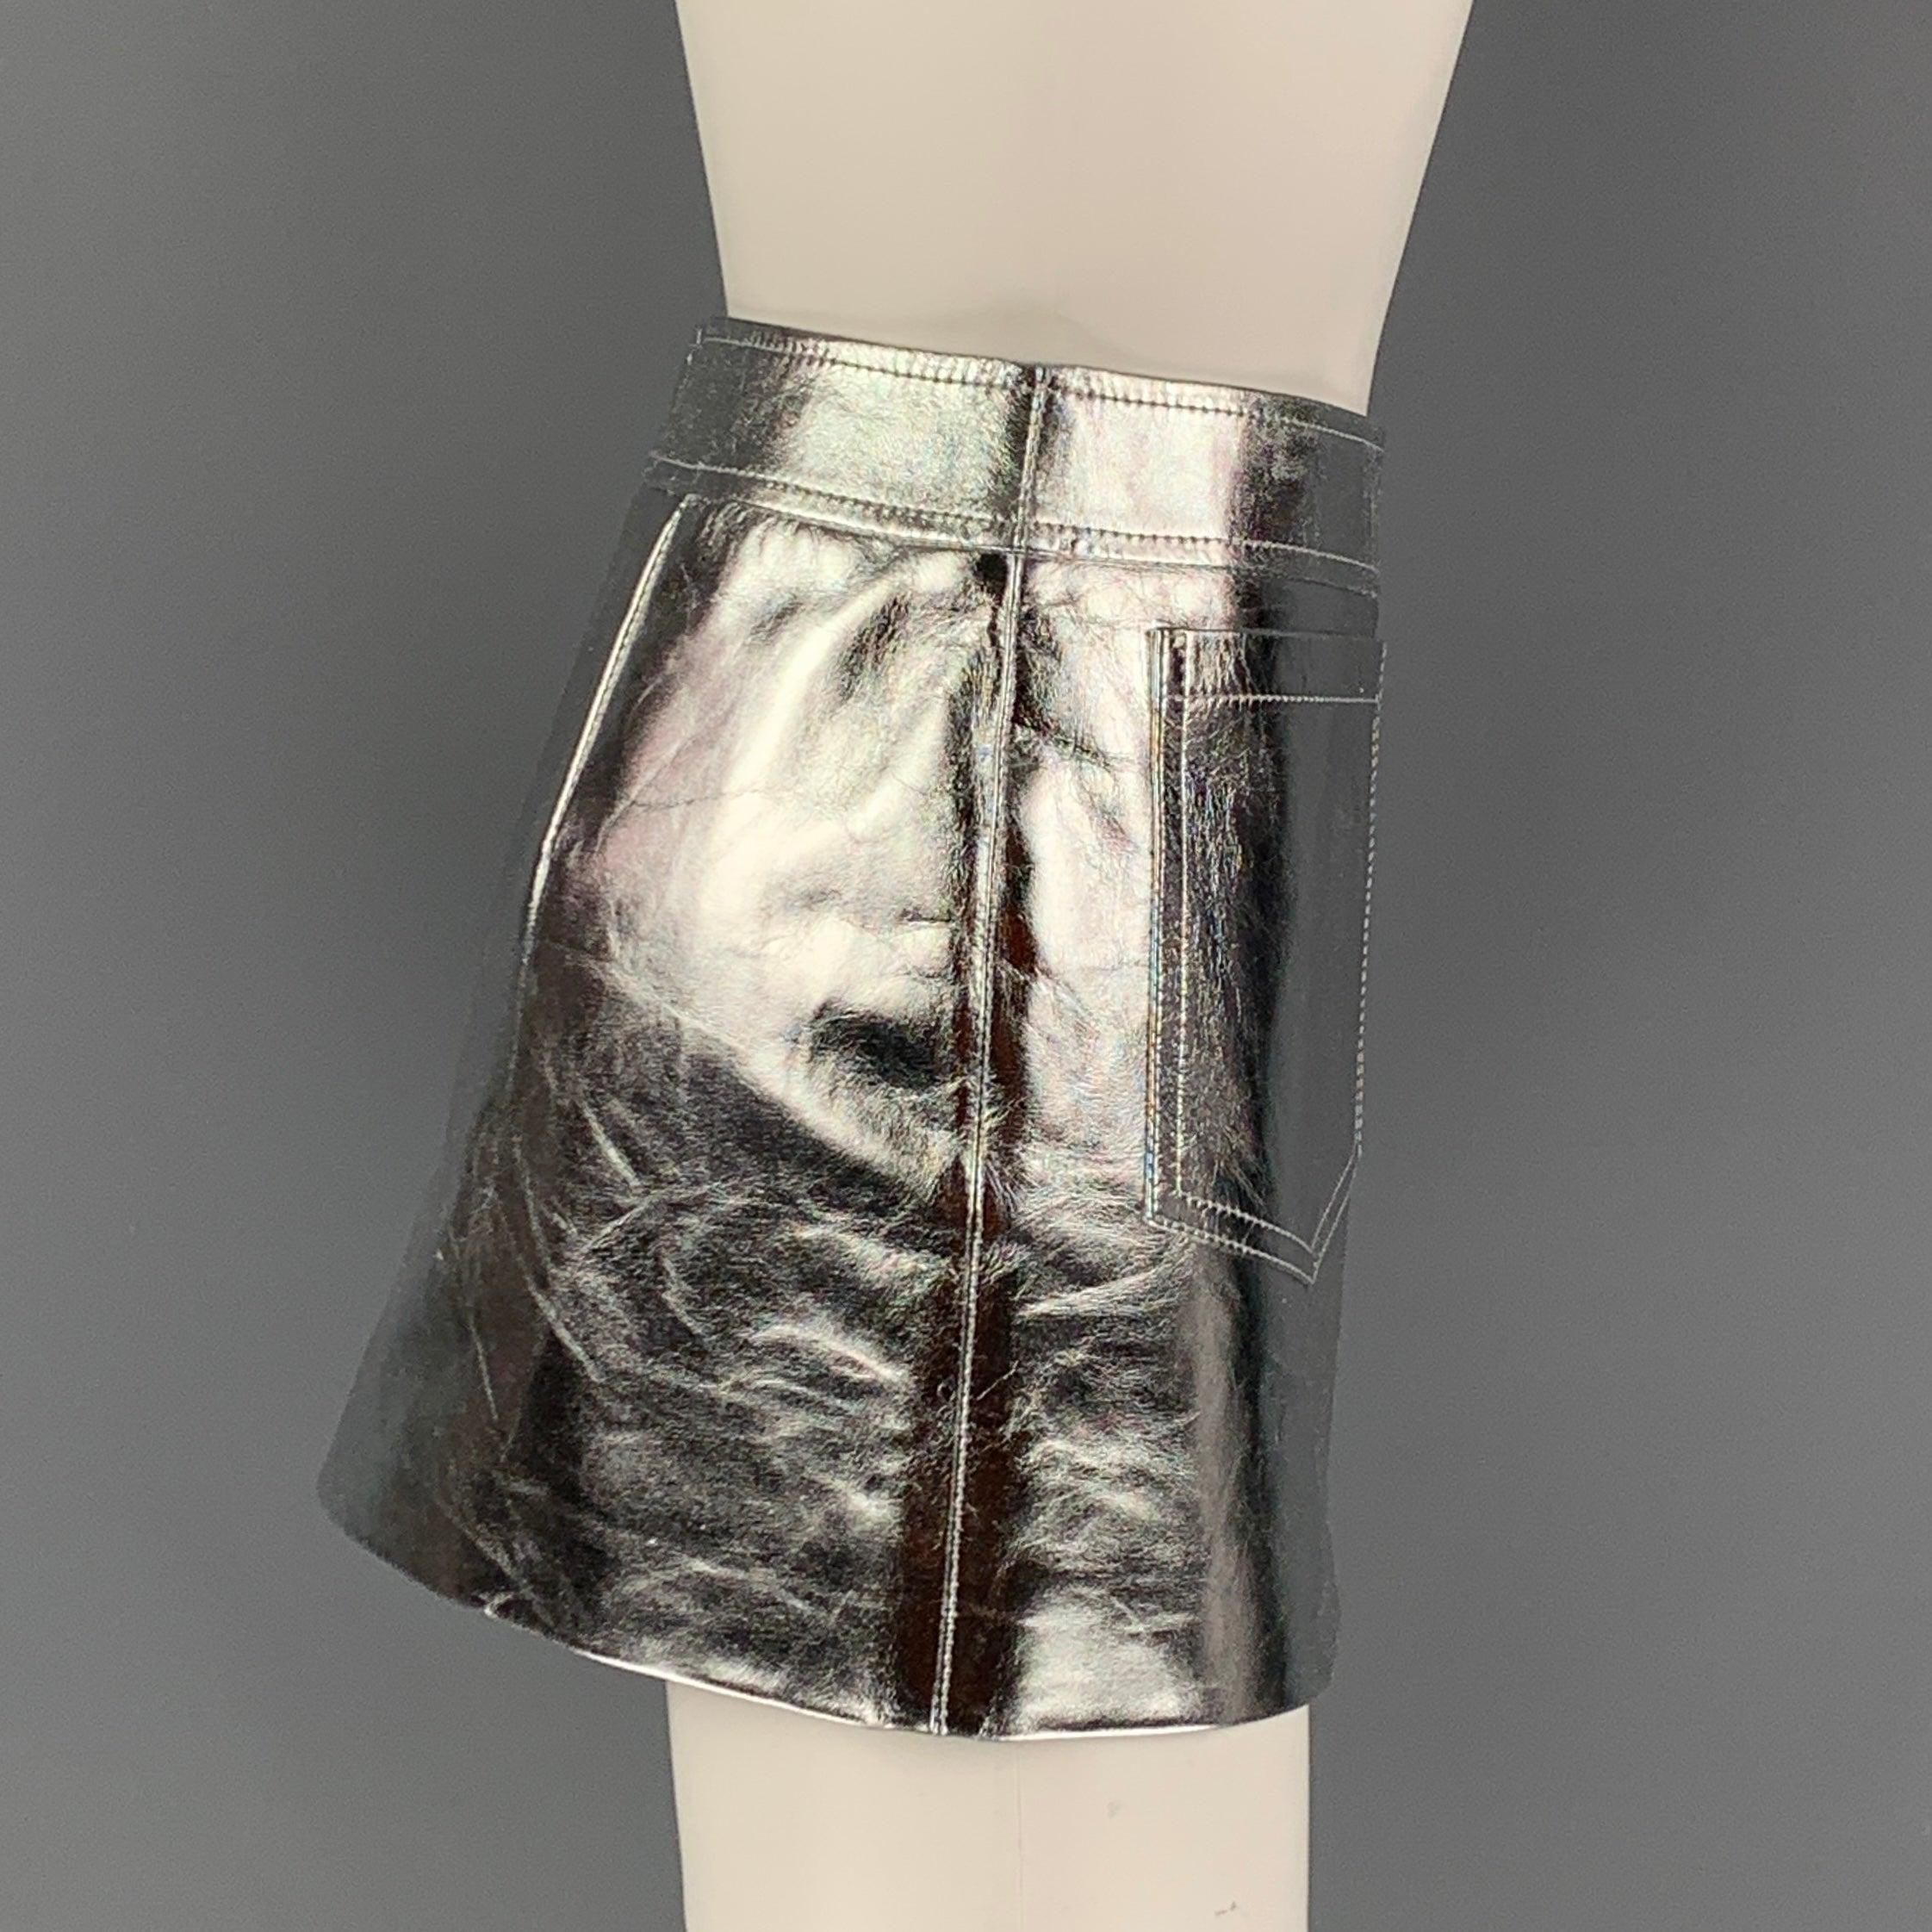 SAINT LAURENT 2022 mini skirt comes in a metallic silver grained leather featuring a high waist, two front patch pockets, silver tone hardware, and a exposed front zipper closure.
New With Tags. 

Marked:   F 36 

Measurements: 
  Waist: 29 inches 